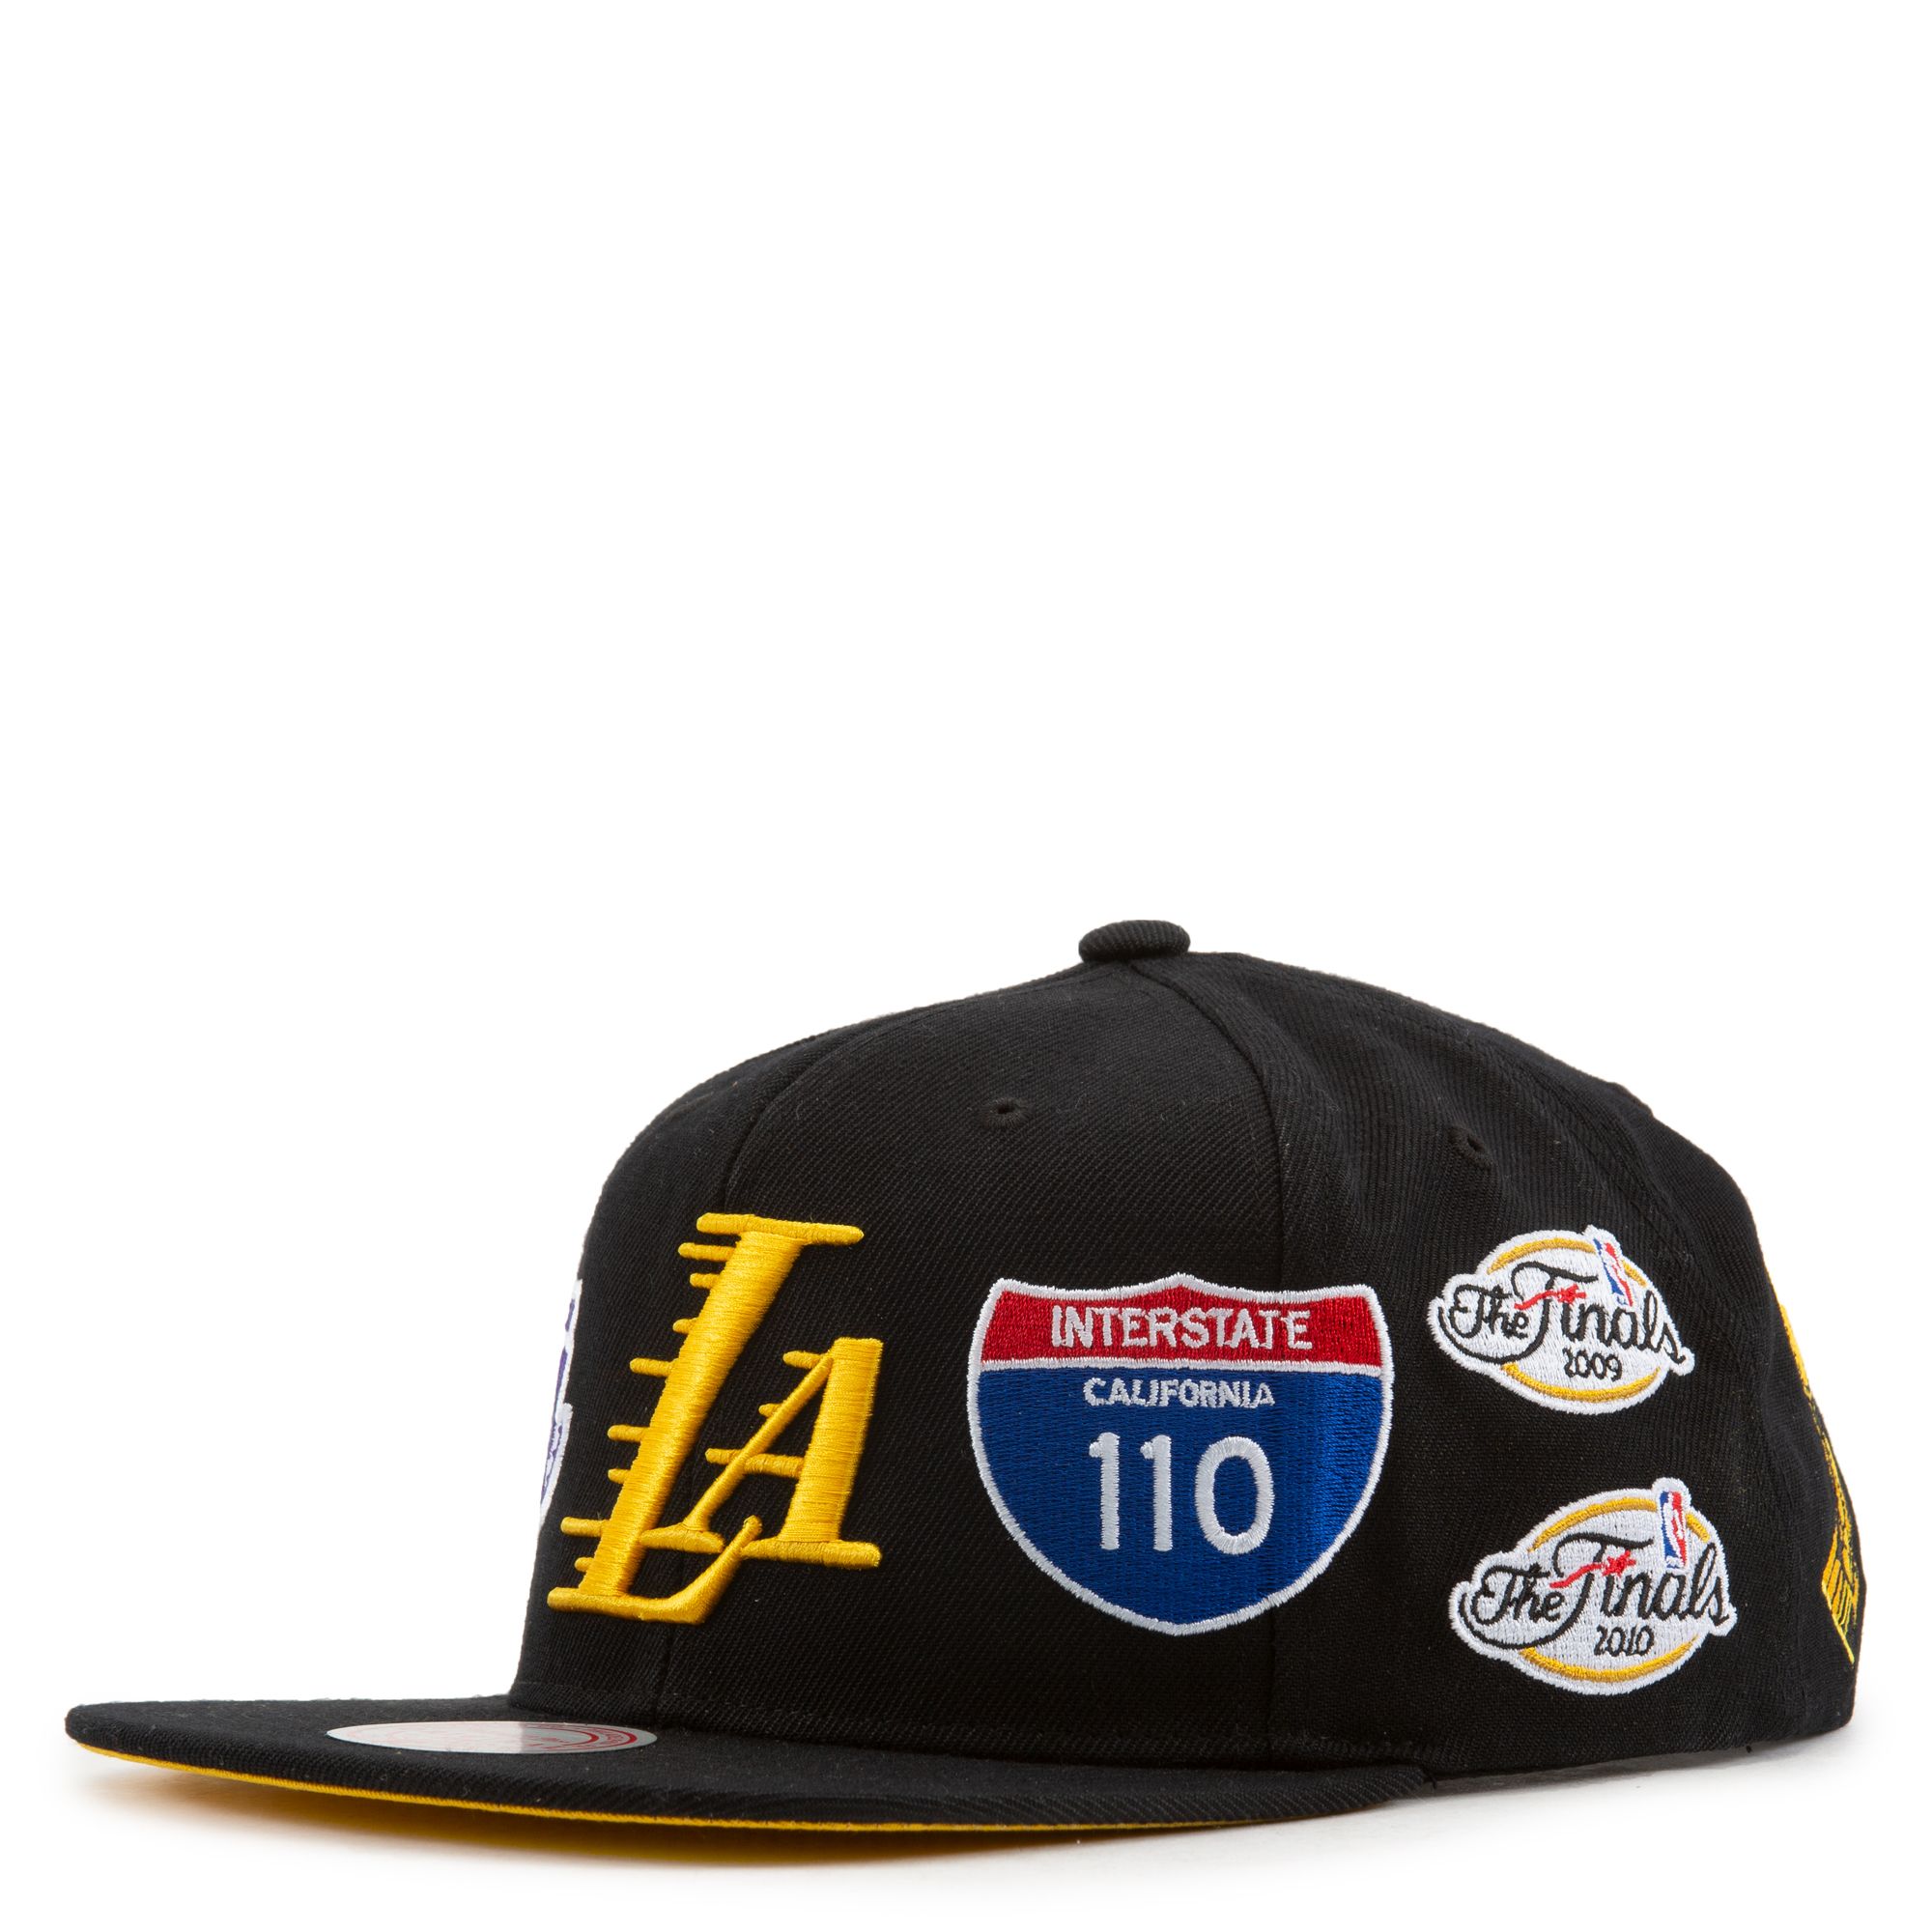 MITCHELL AND NESS Los Angeles Lakers Hat 012VZ 805 5LAKER - Shiekh